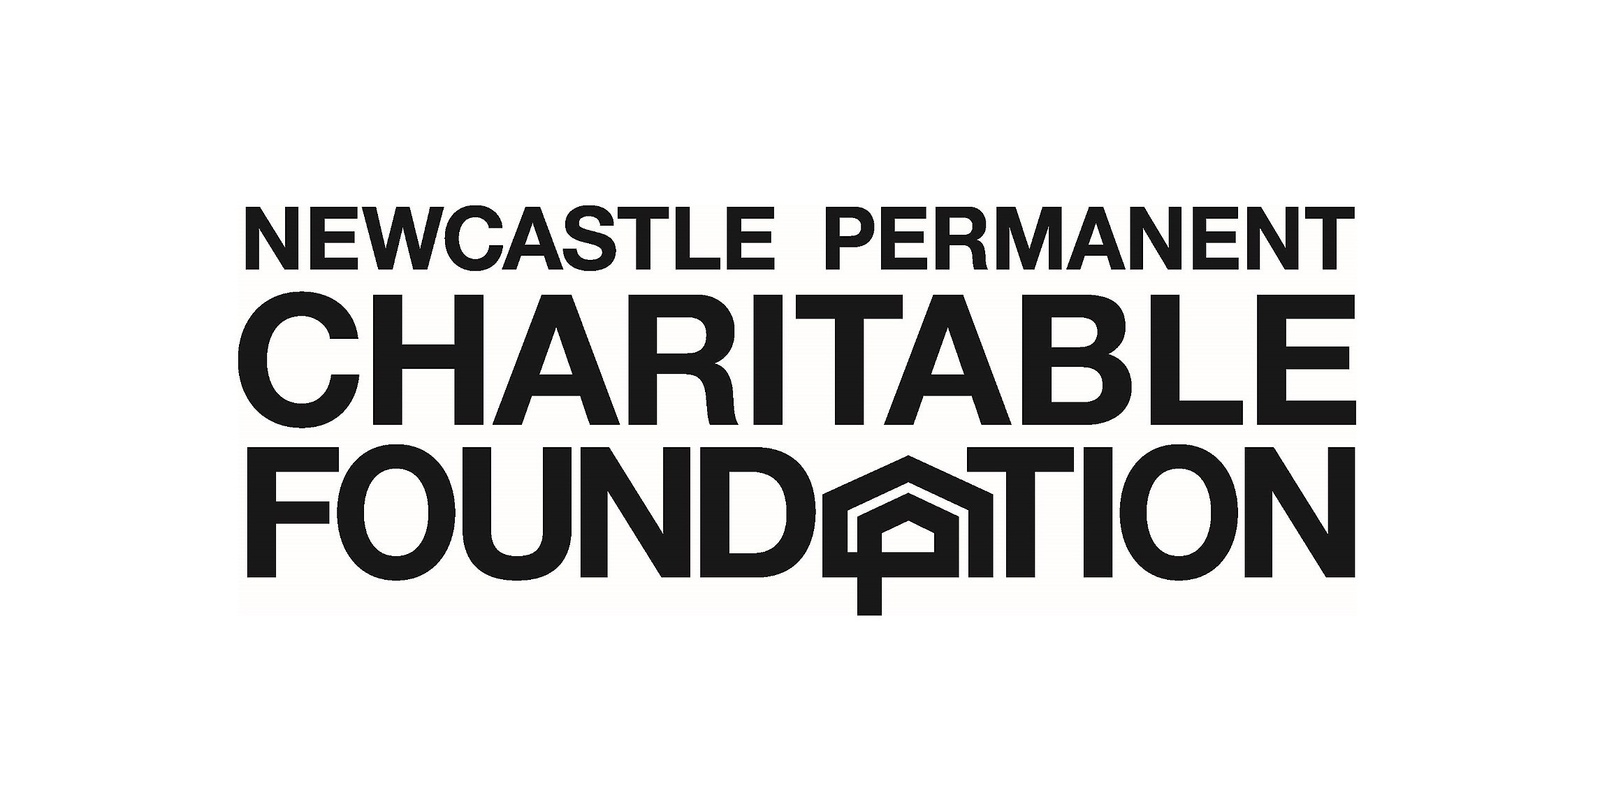 Newcastle Permanent Charitable Foundation's banner